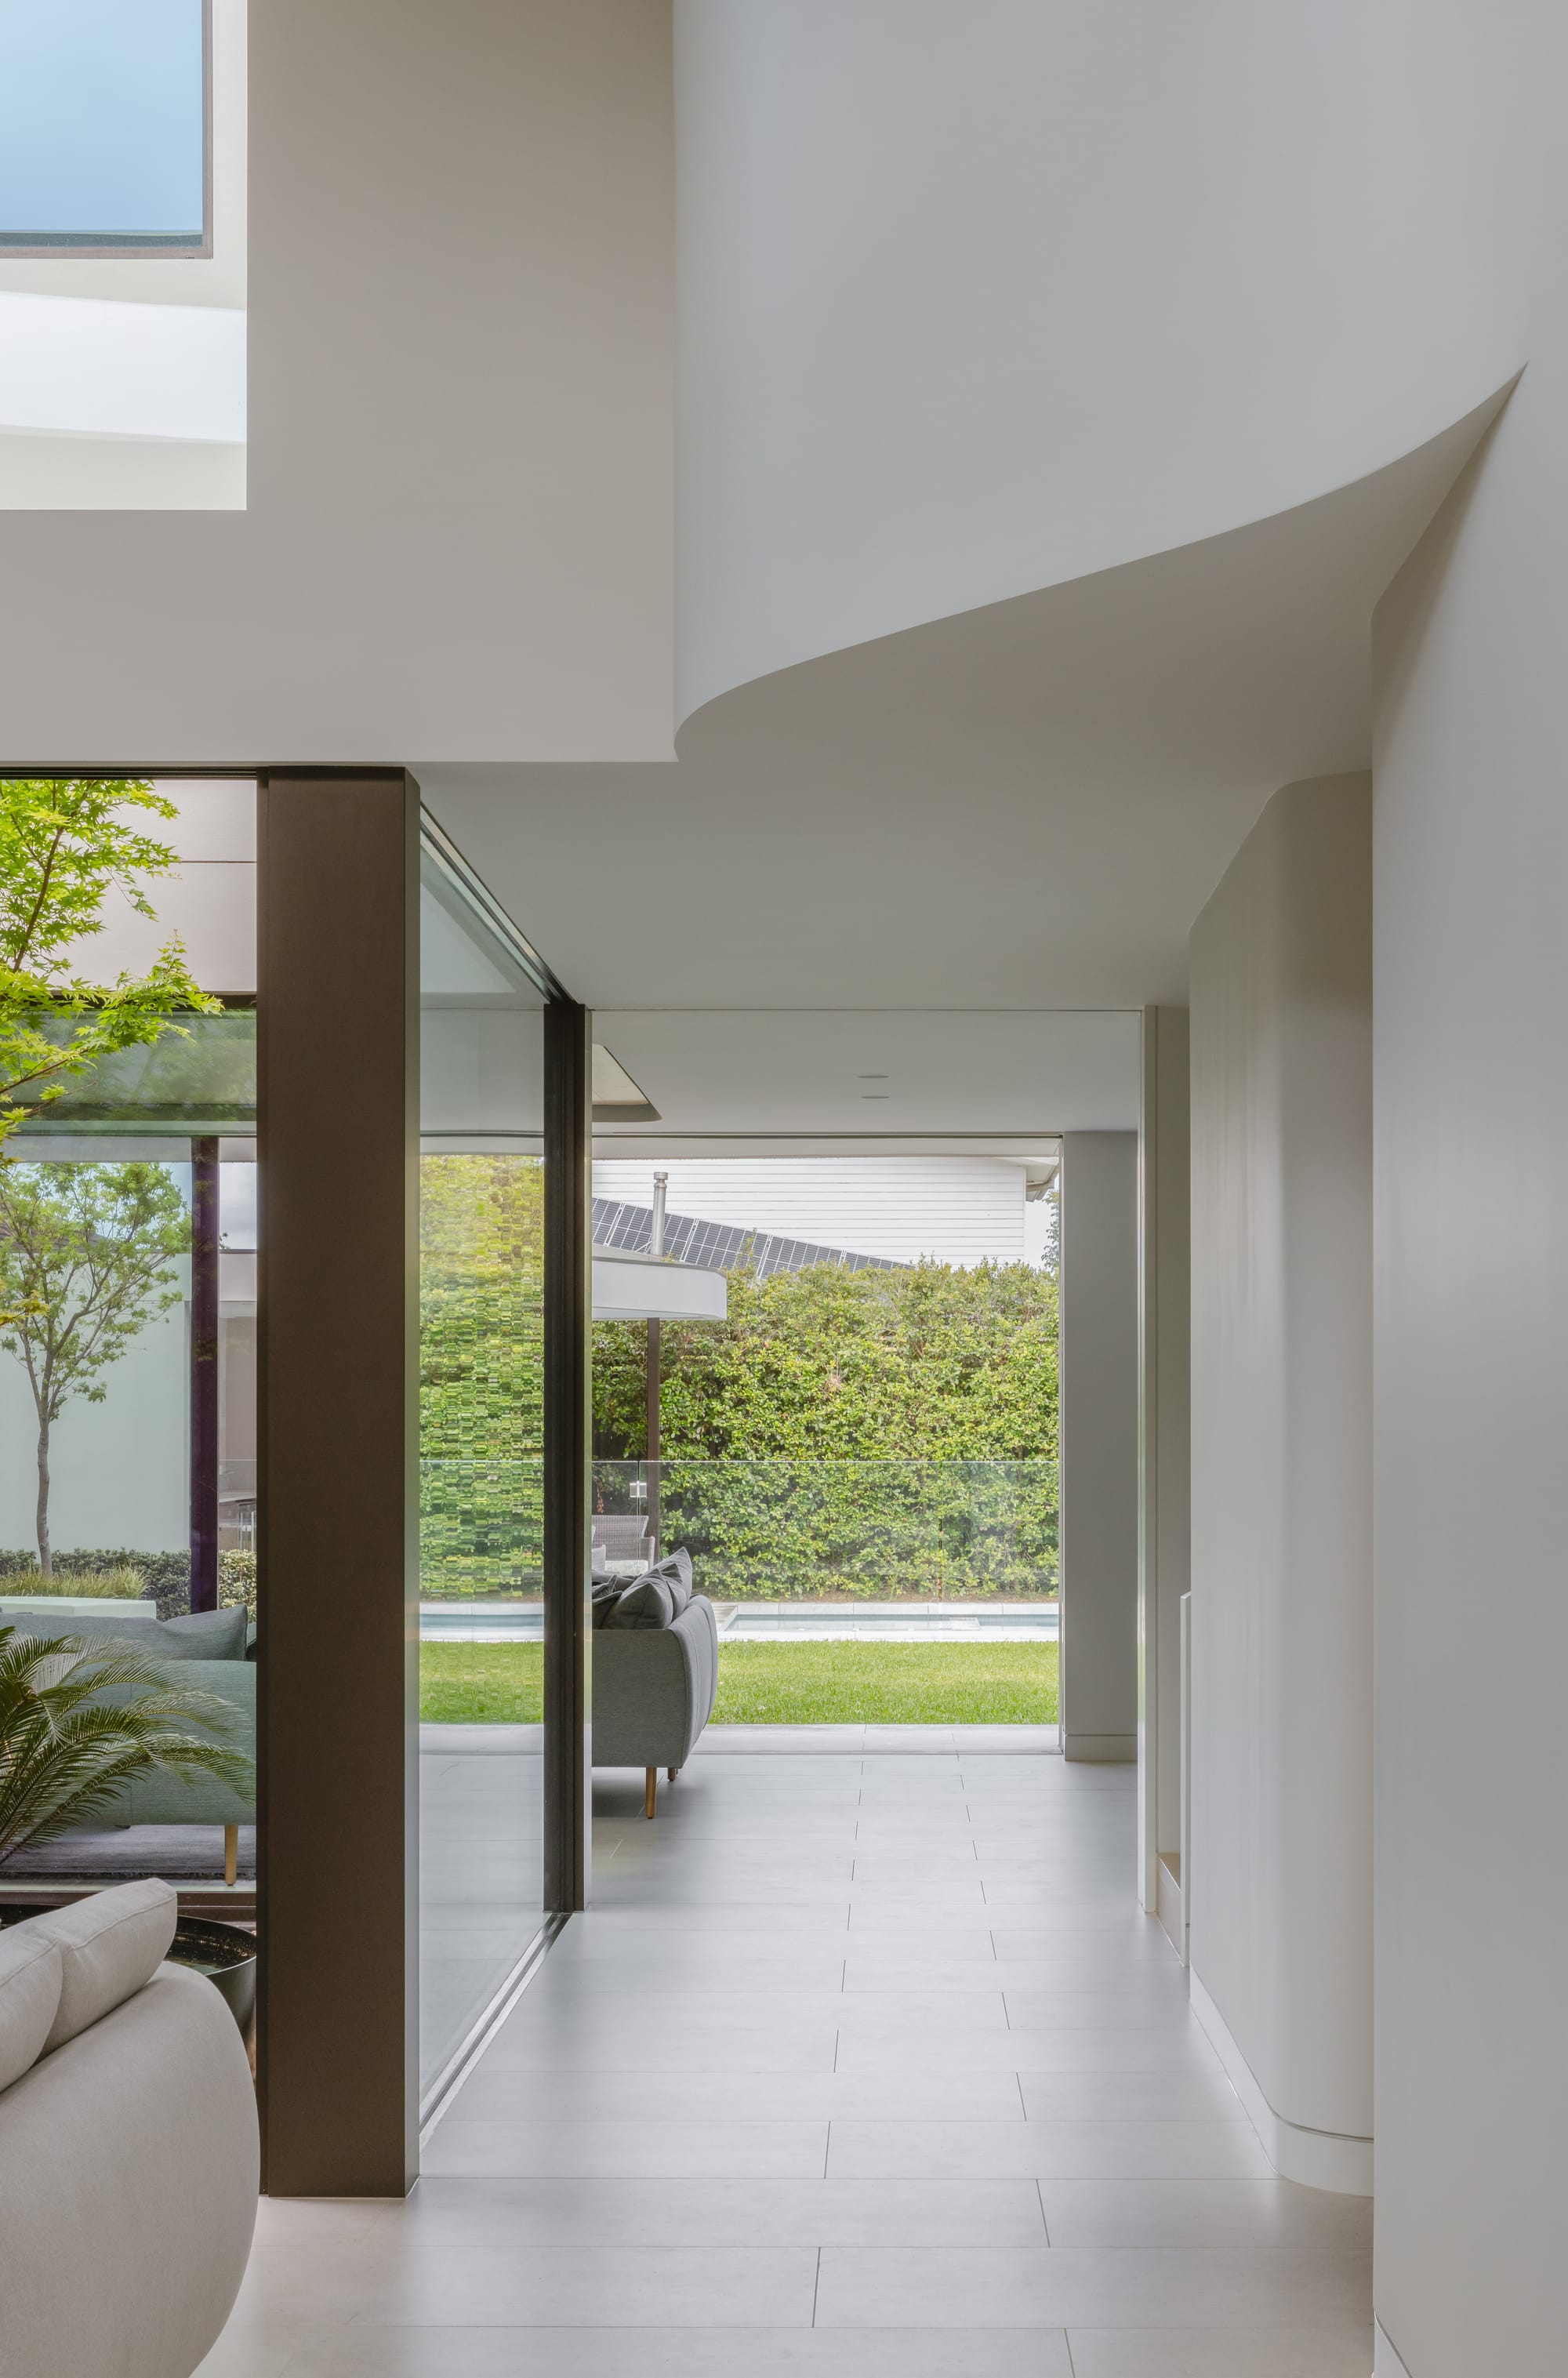 Kenneth Street by Design Studio Group showing the open hallway and the link to the garden courtyard